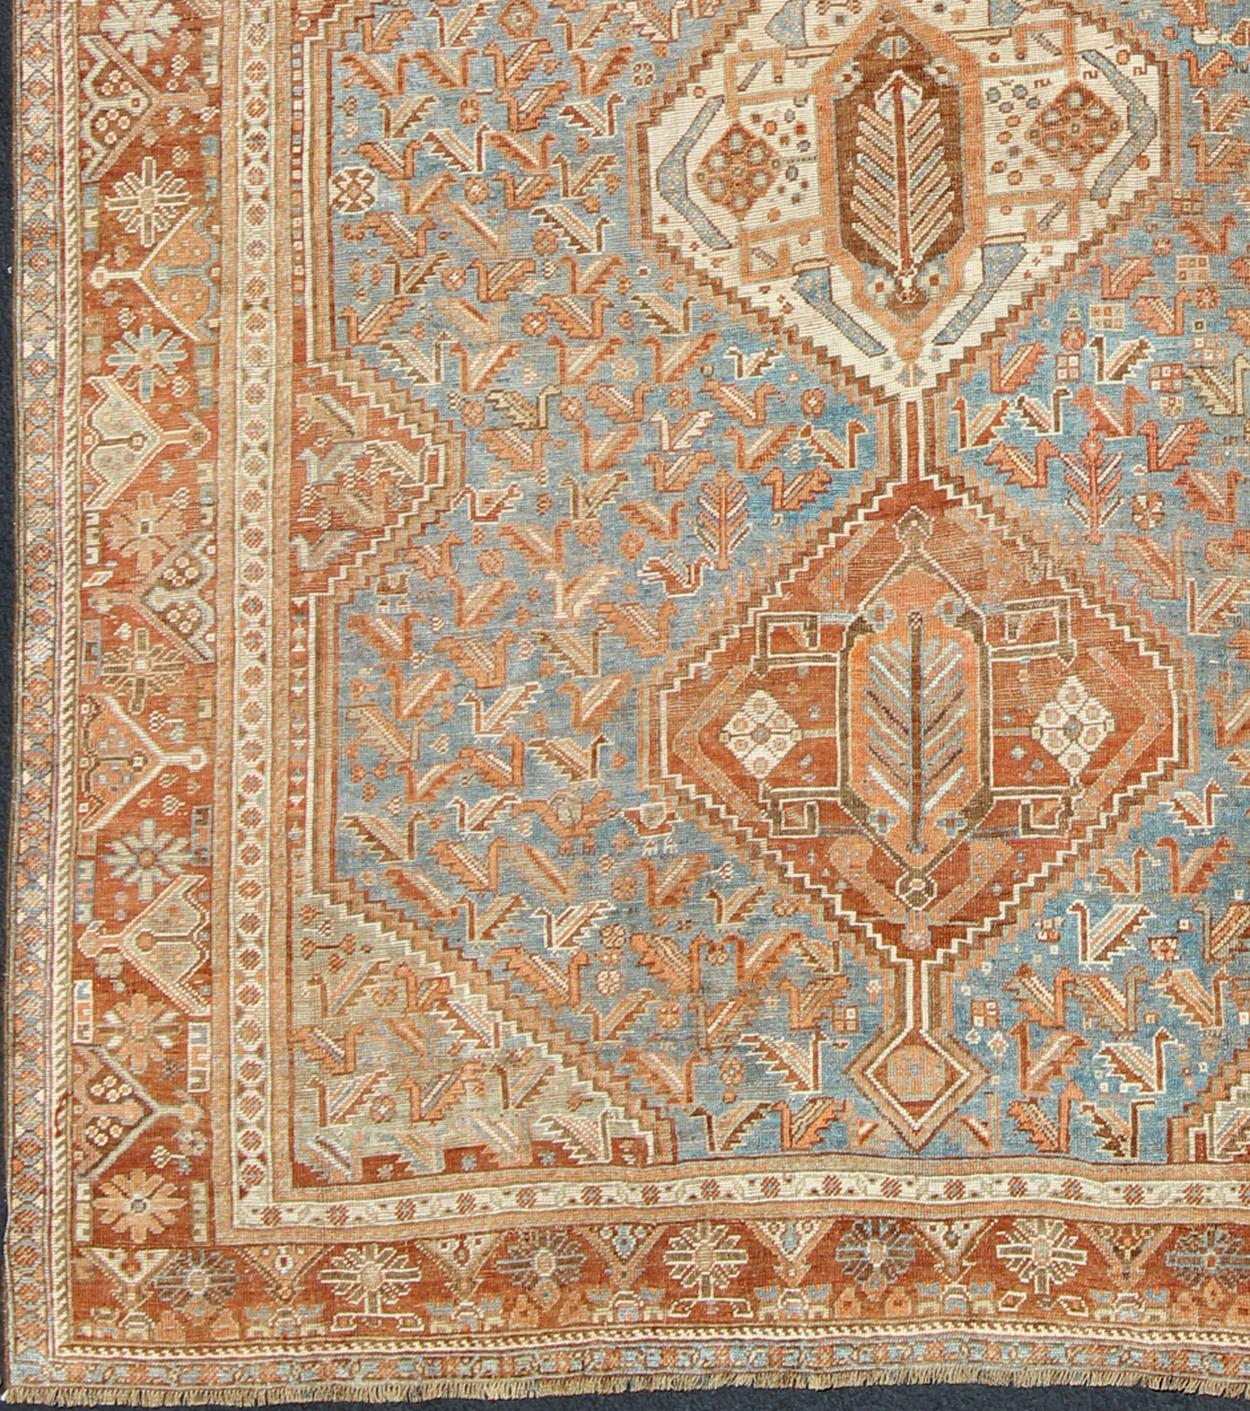 Persian vintage Shiraz carpet in red and blue with geometric medallions, rug ema-7552, country of origin / type: Iran / Shiraz, circa 1930.

This vintage Persian Shiraz rug (circa early 20th century) features a unique blend of colors and an